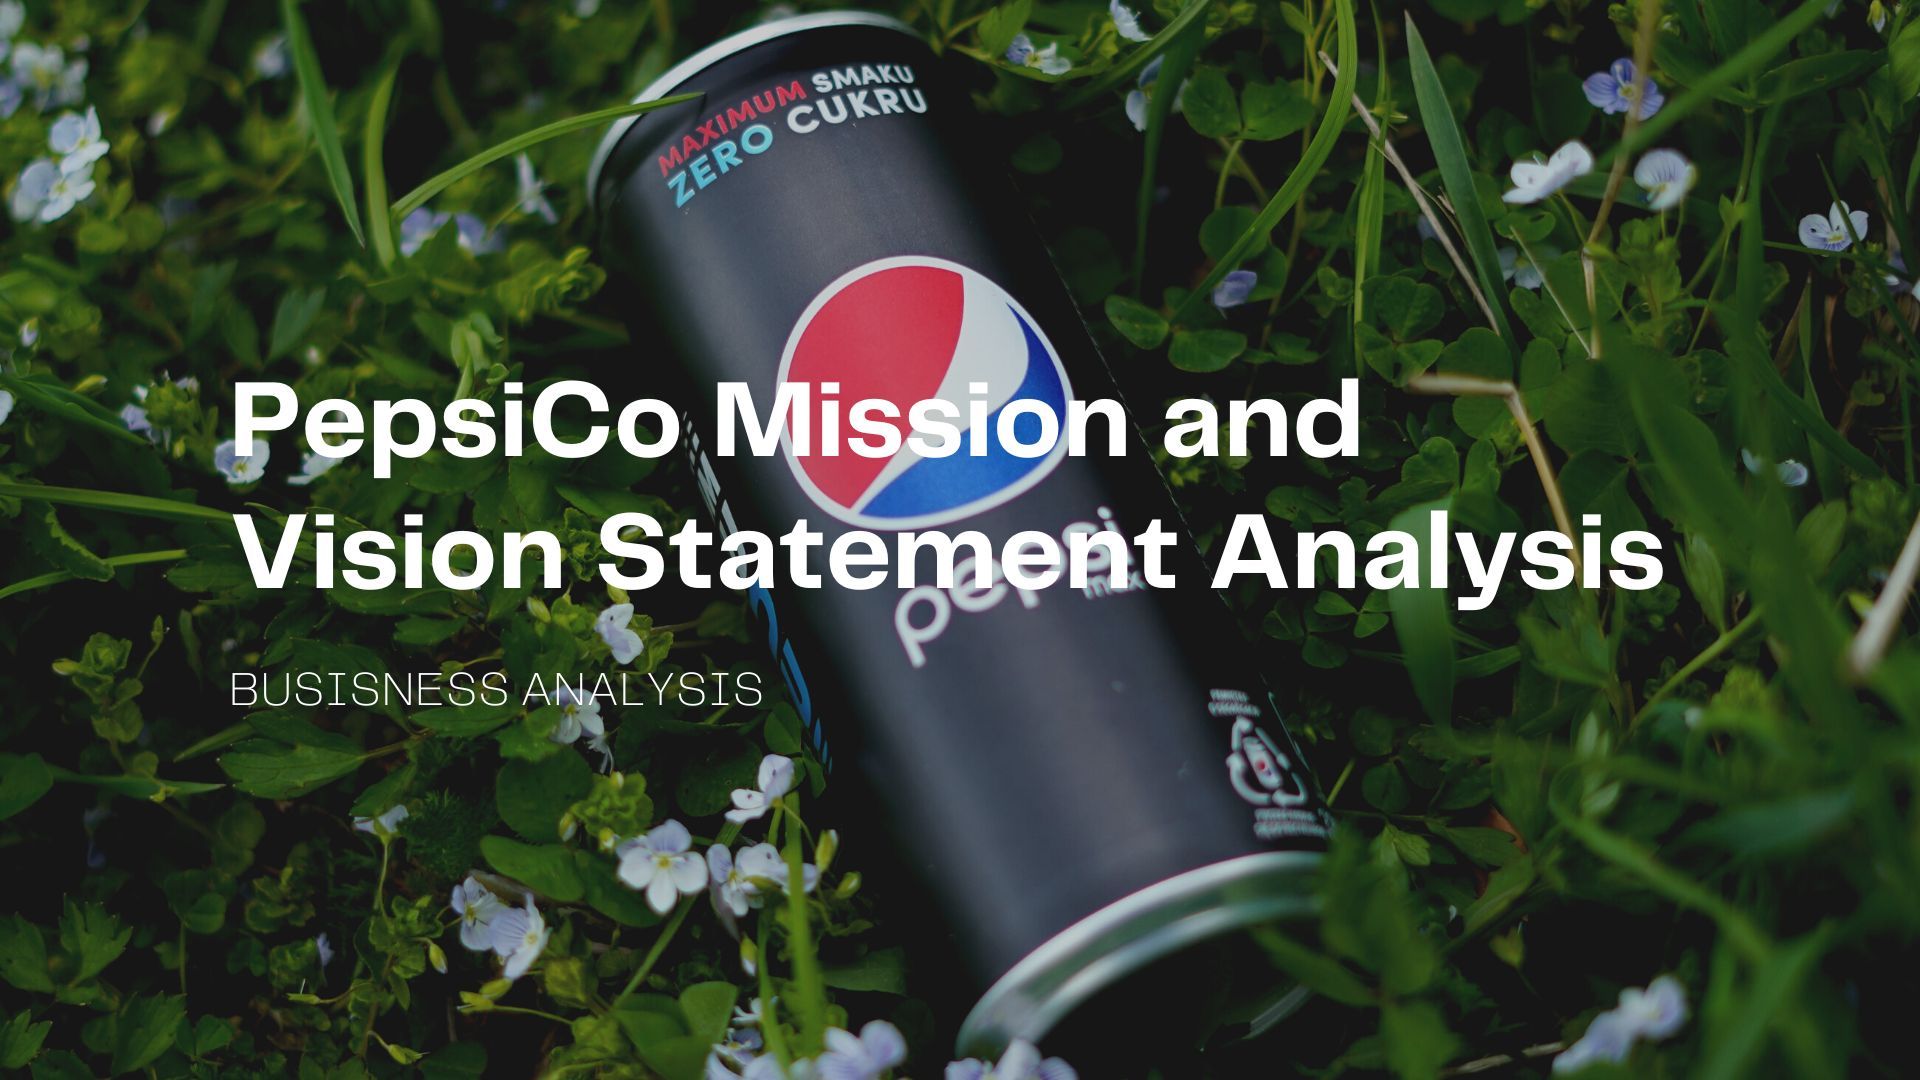 PepsiCo Mission and Vision Statement Analysis (2).jpg